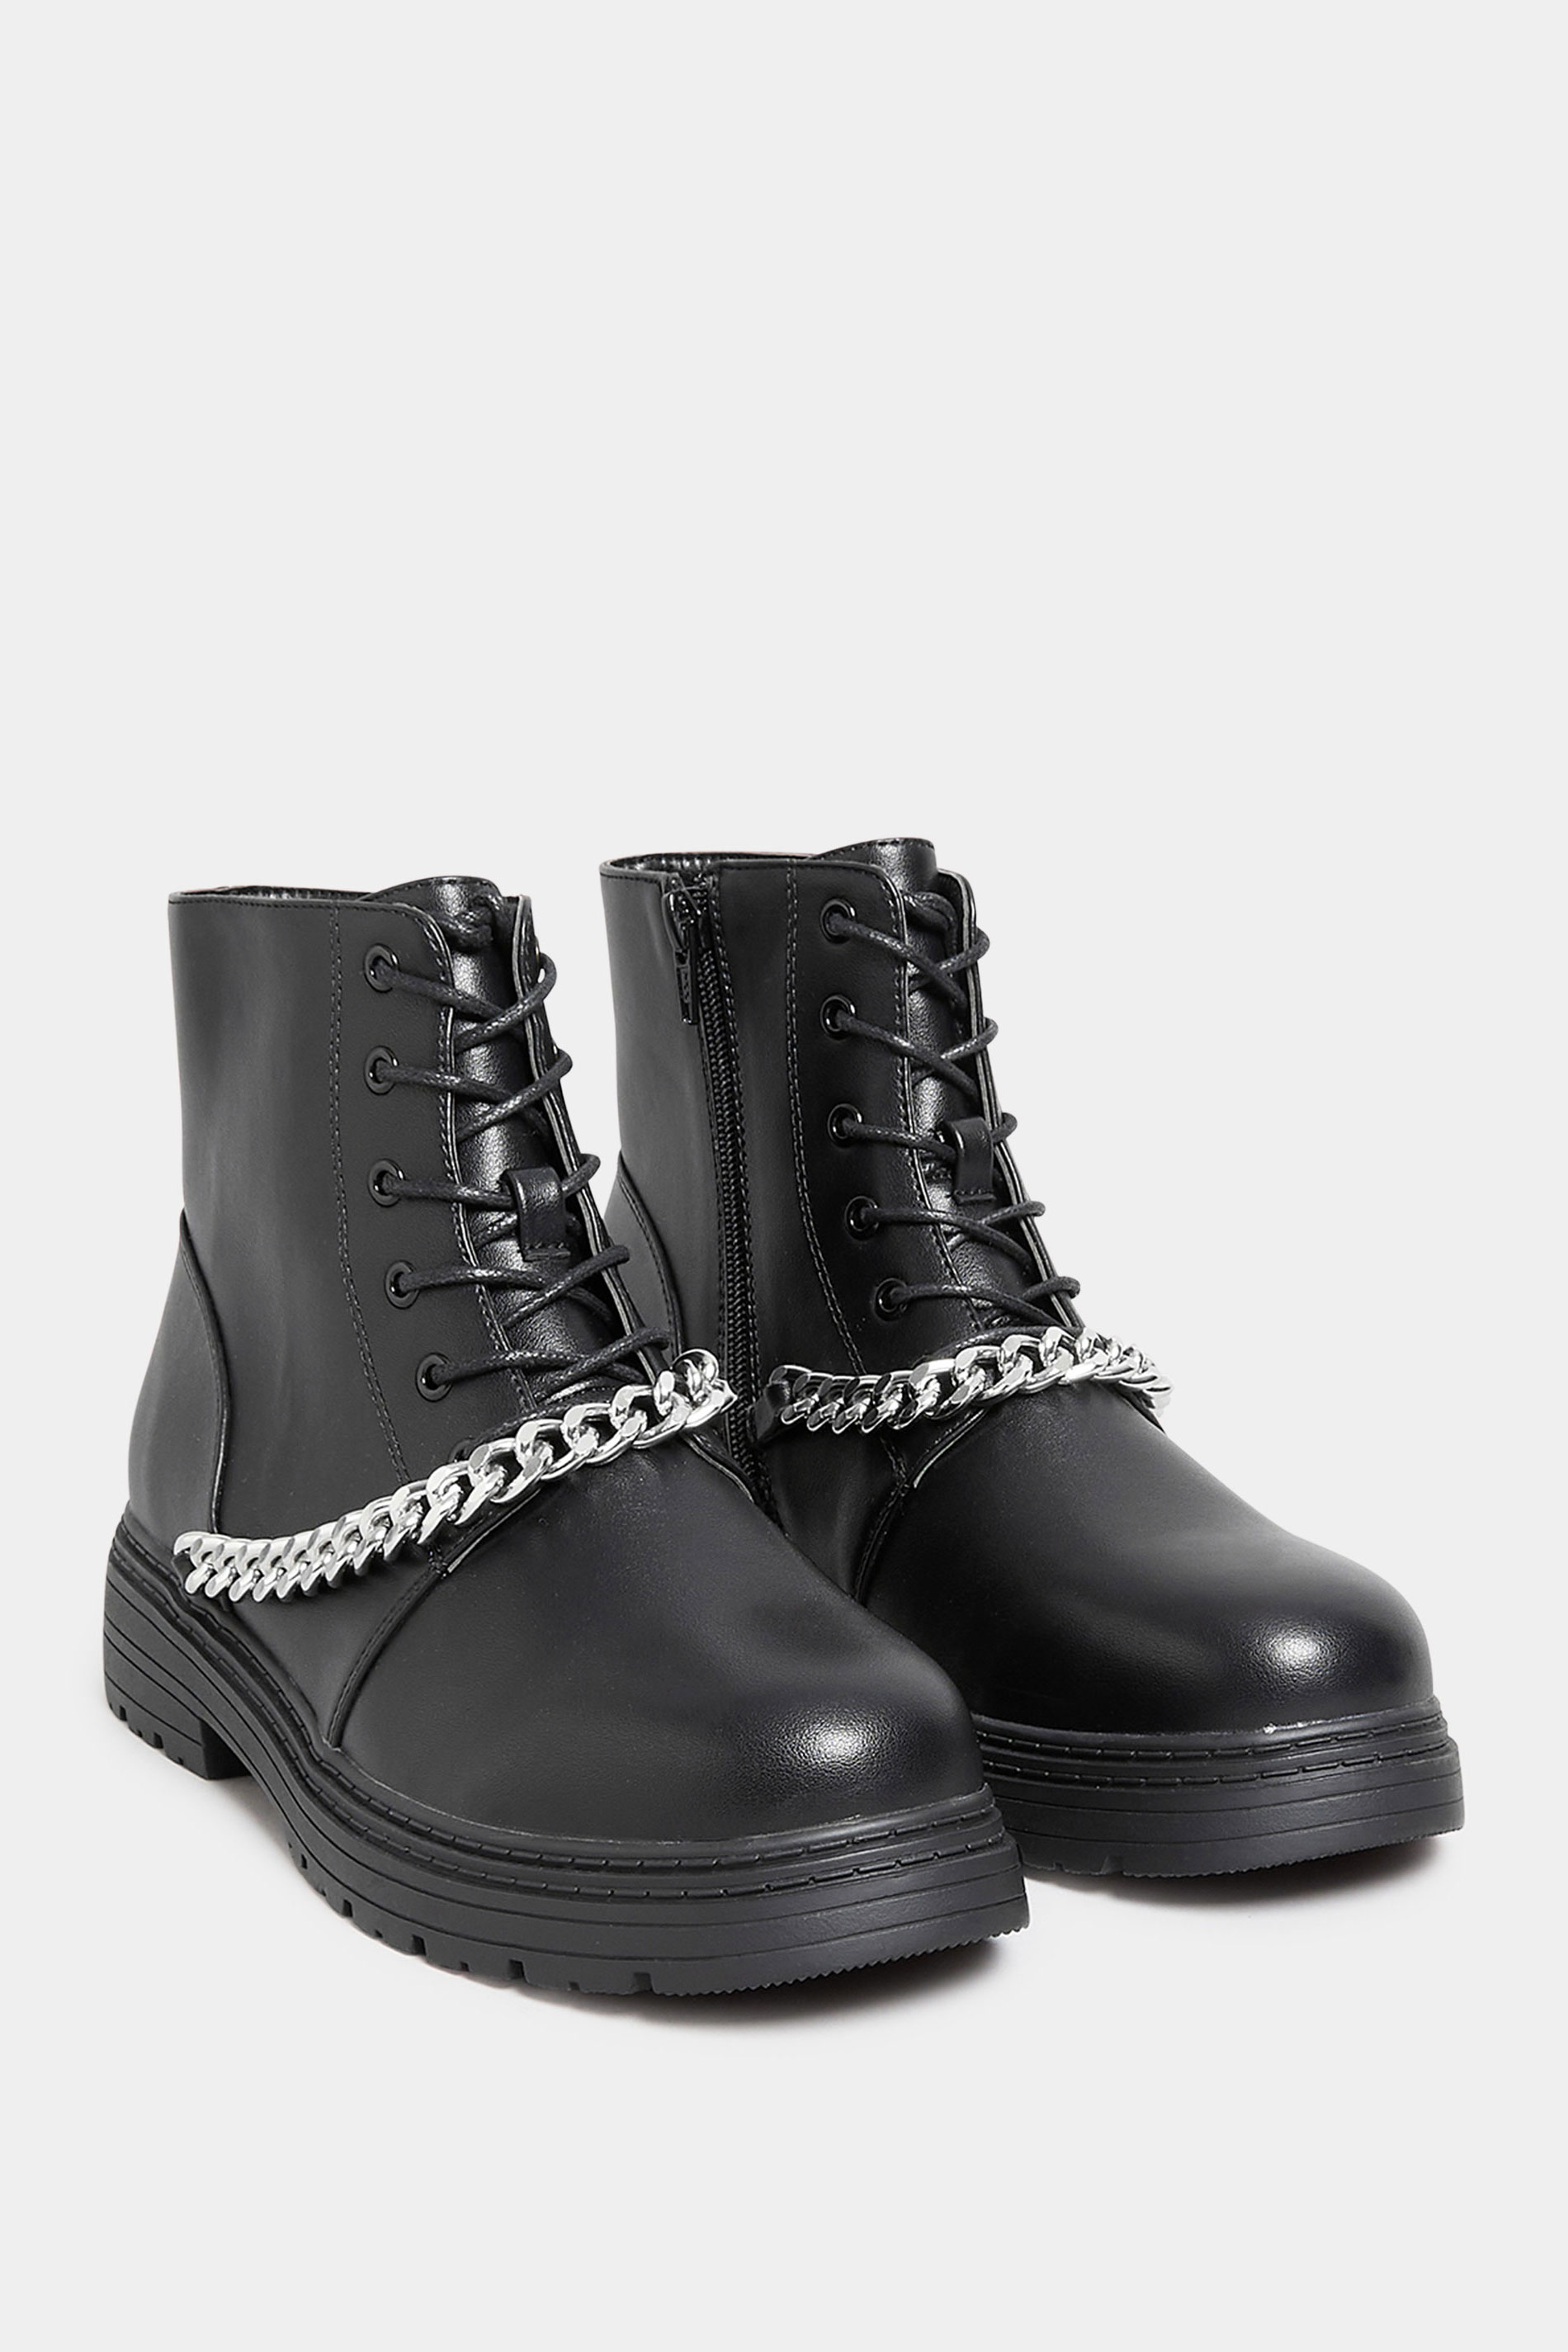 Black Chain Lace Up Boots In Wide & Extra Wide Fit | Yours Clothing 2